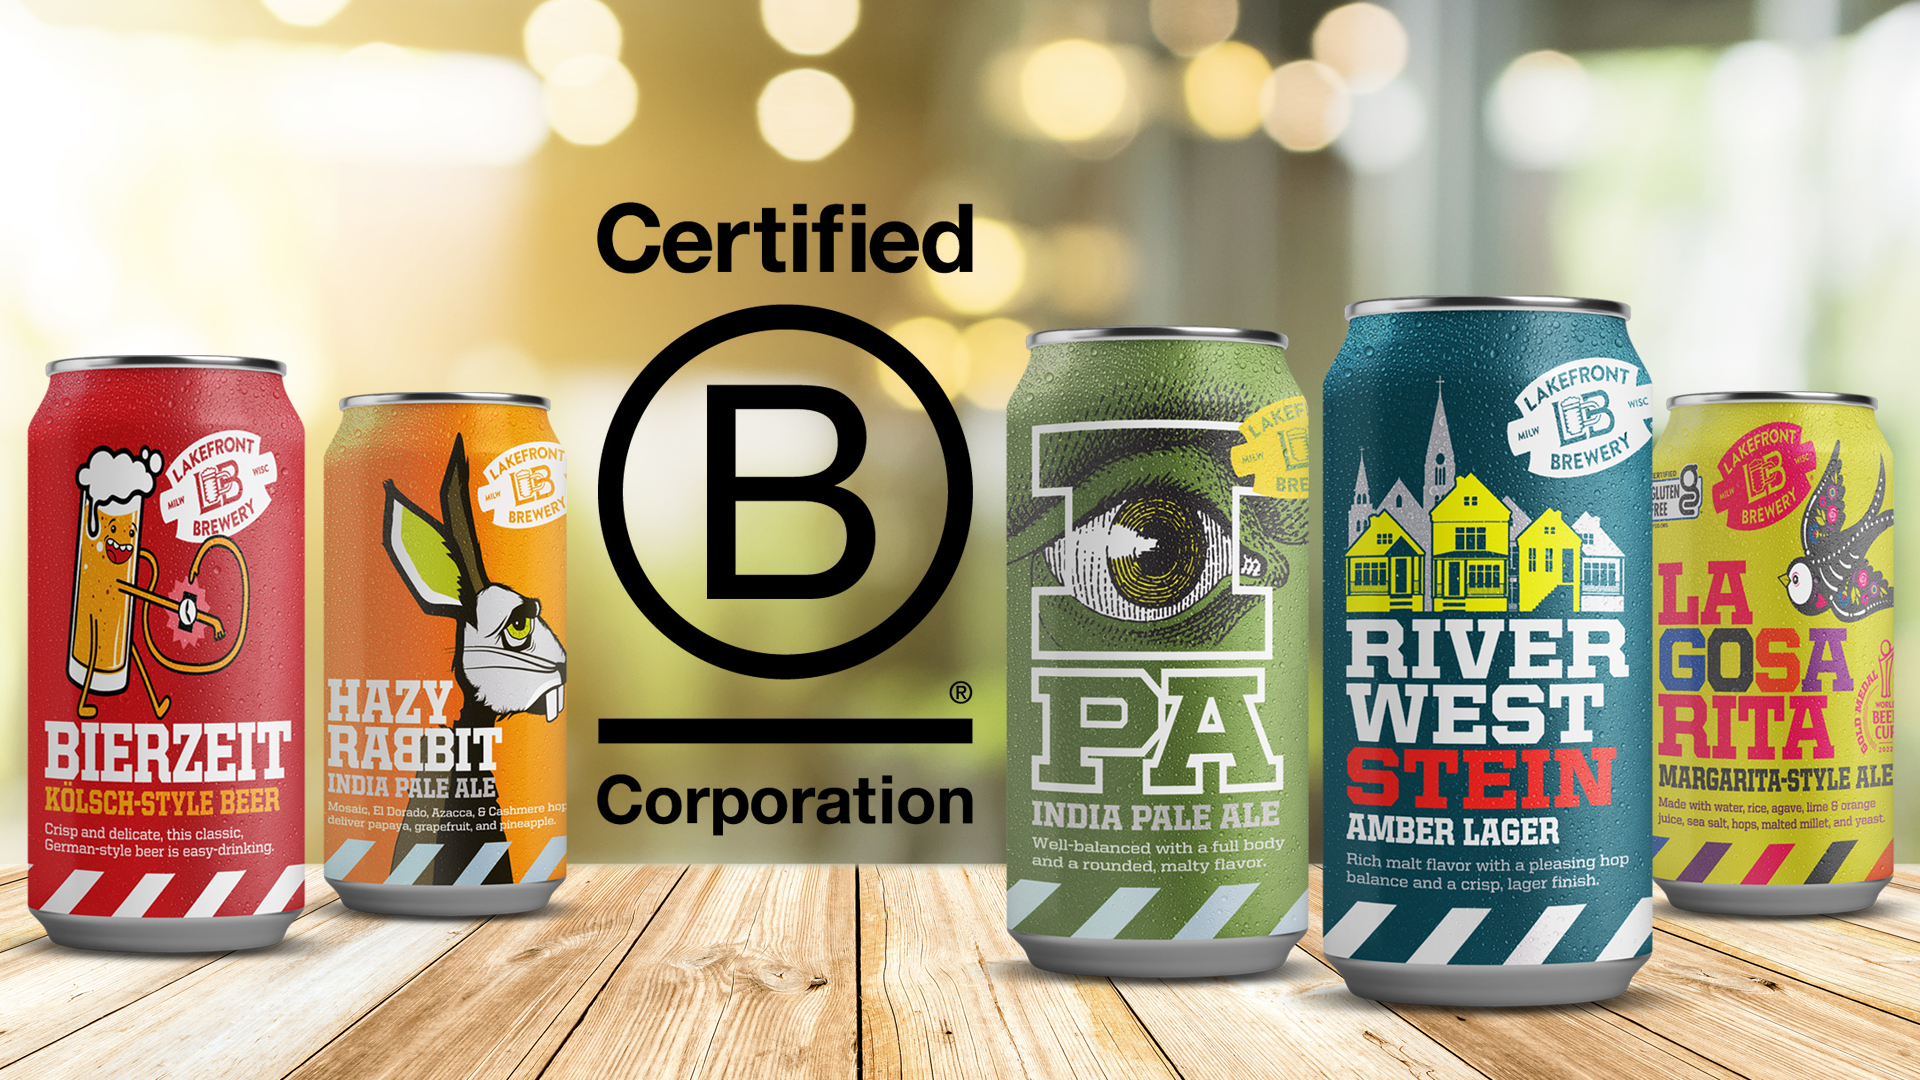 Lakefront Brewery is Recertified as a“Certified B Corporation.”